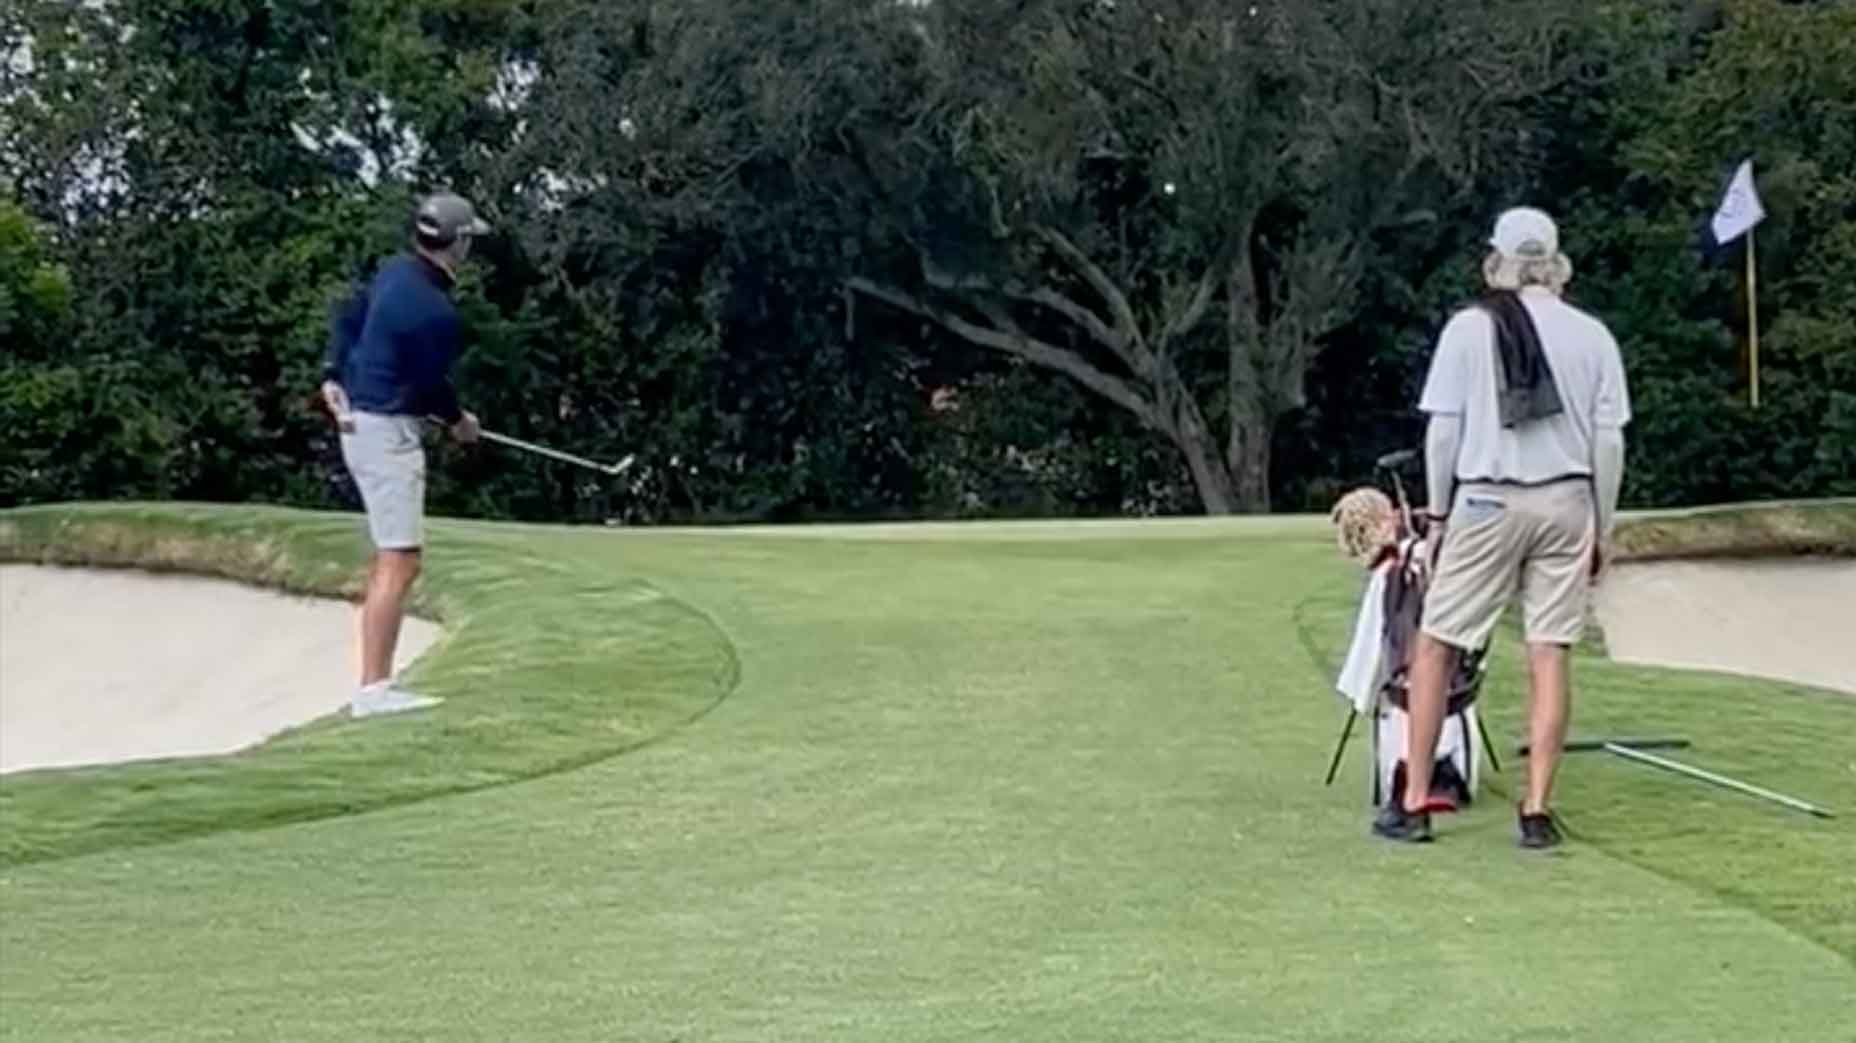 Austen Truslow, a PGA Tour player known as a trick-shot enthusiast, is using a one-handed chipping technique at his U.S. Open qualifier